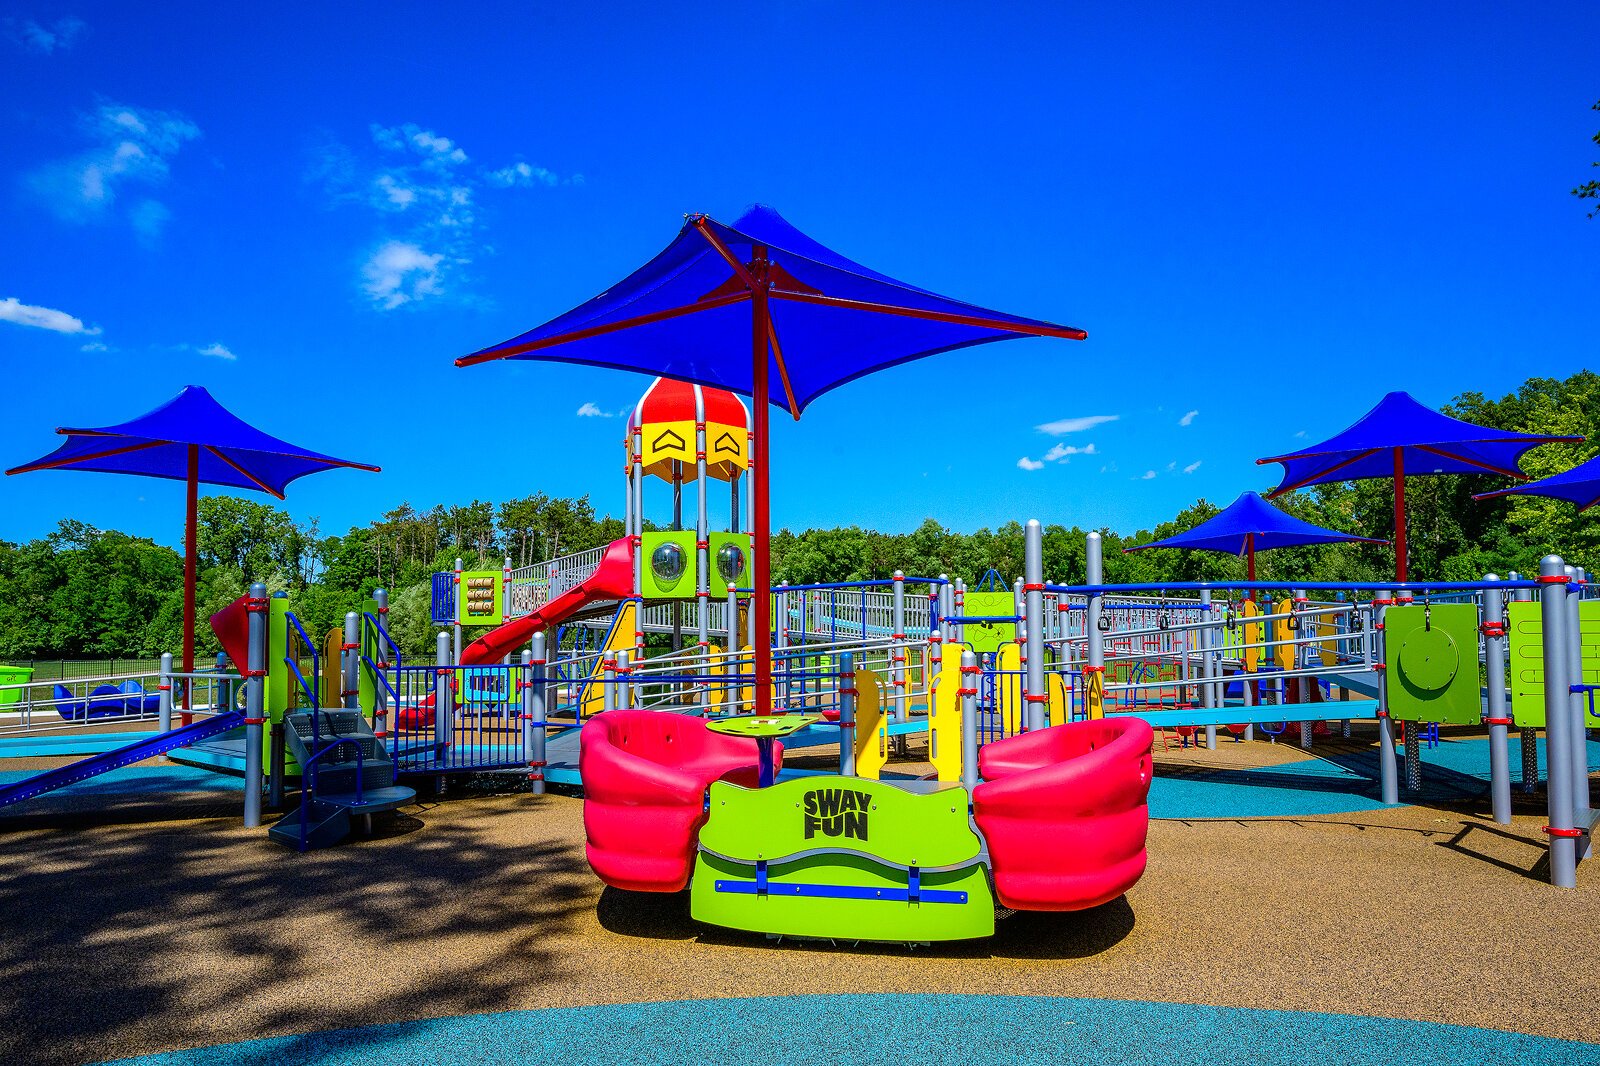 Scarlet’s Playground at Dodge Park #5 in Commerce Township